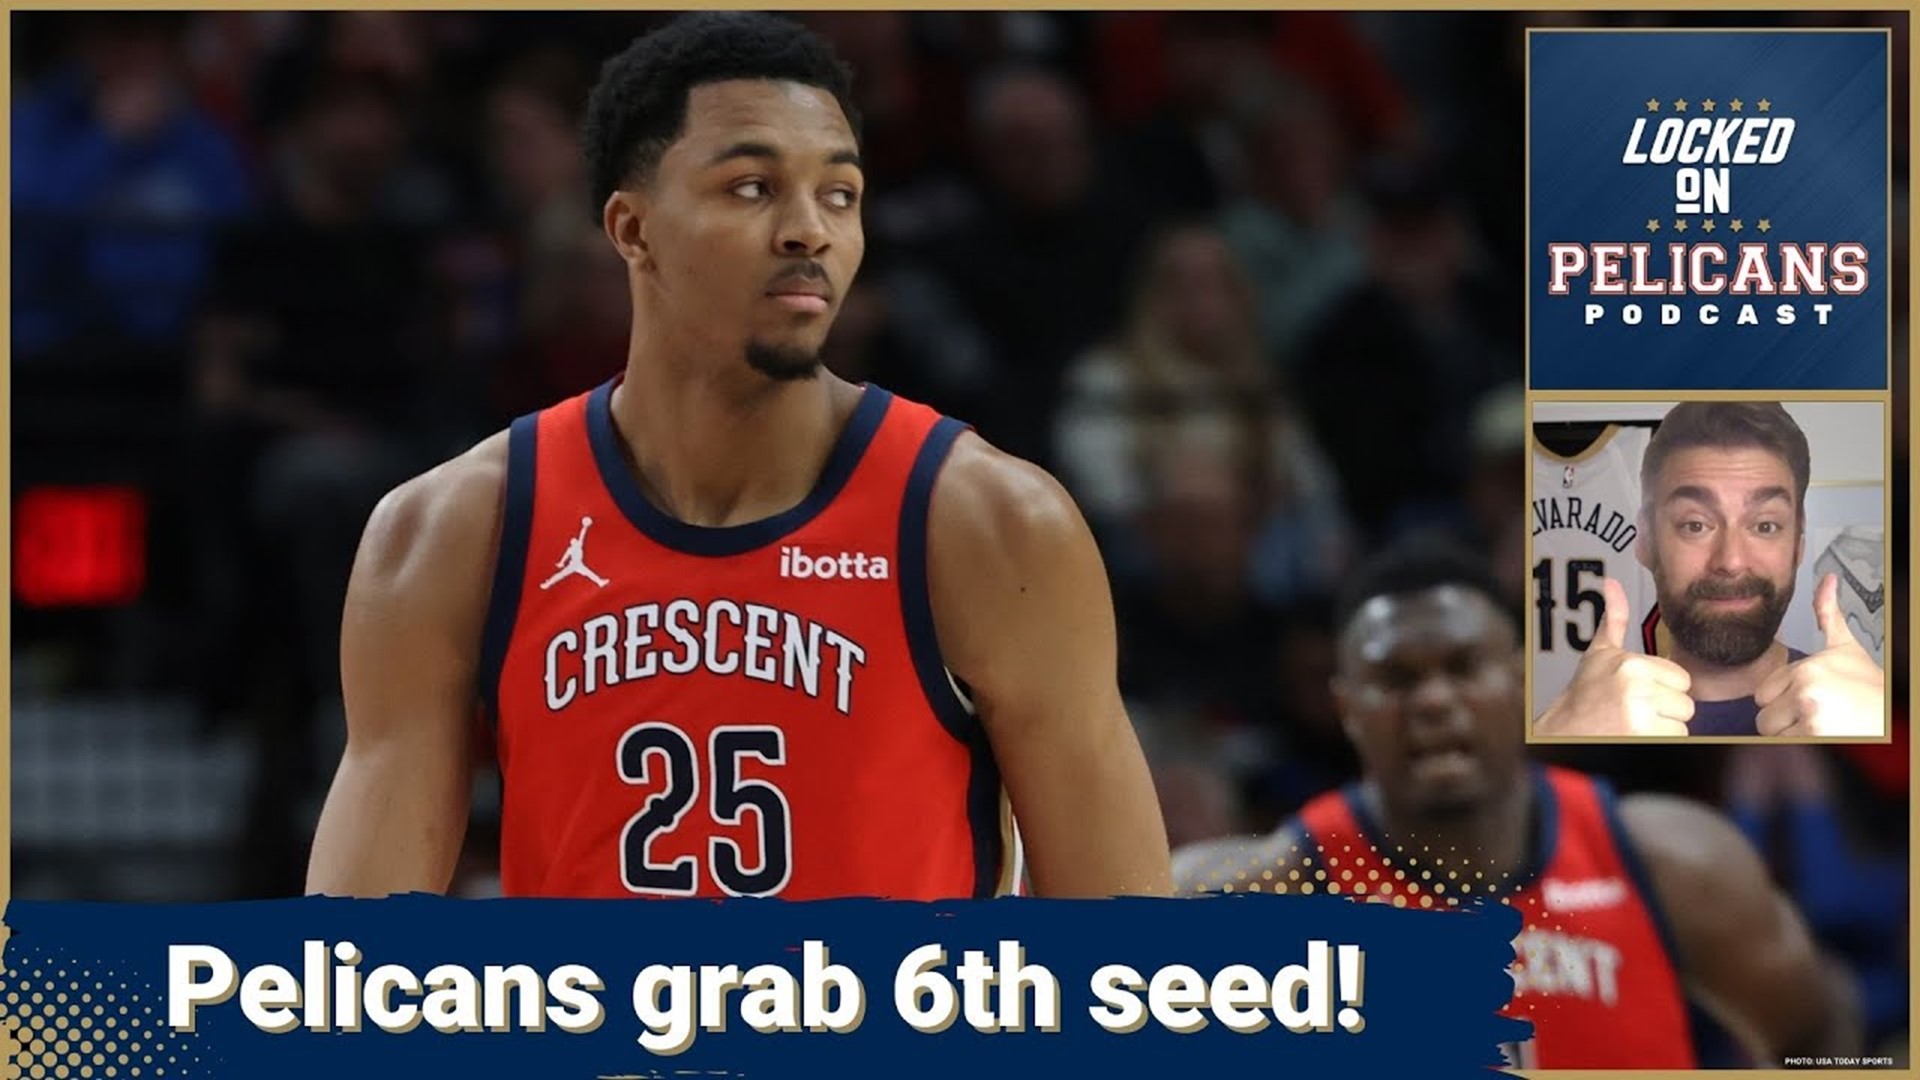 After the New Orleans Pelicans beat the Portland Trail Blazers with big scoring nights from CJ McCollum and Trey Murphy they are back in the 6th seed.